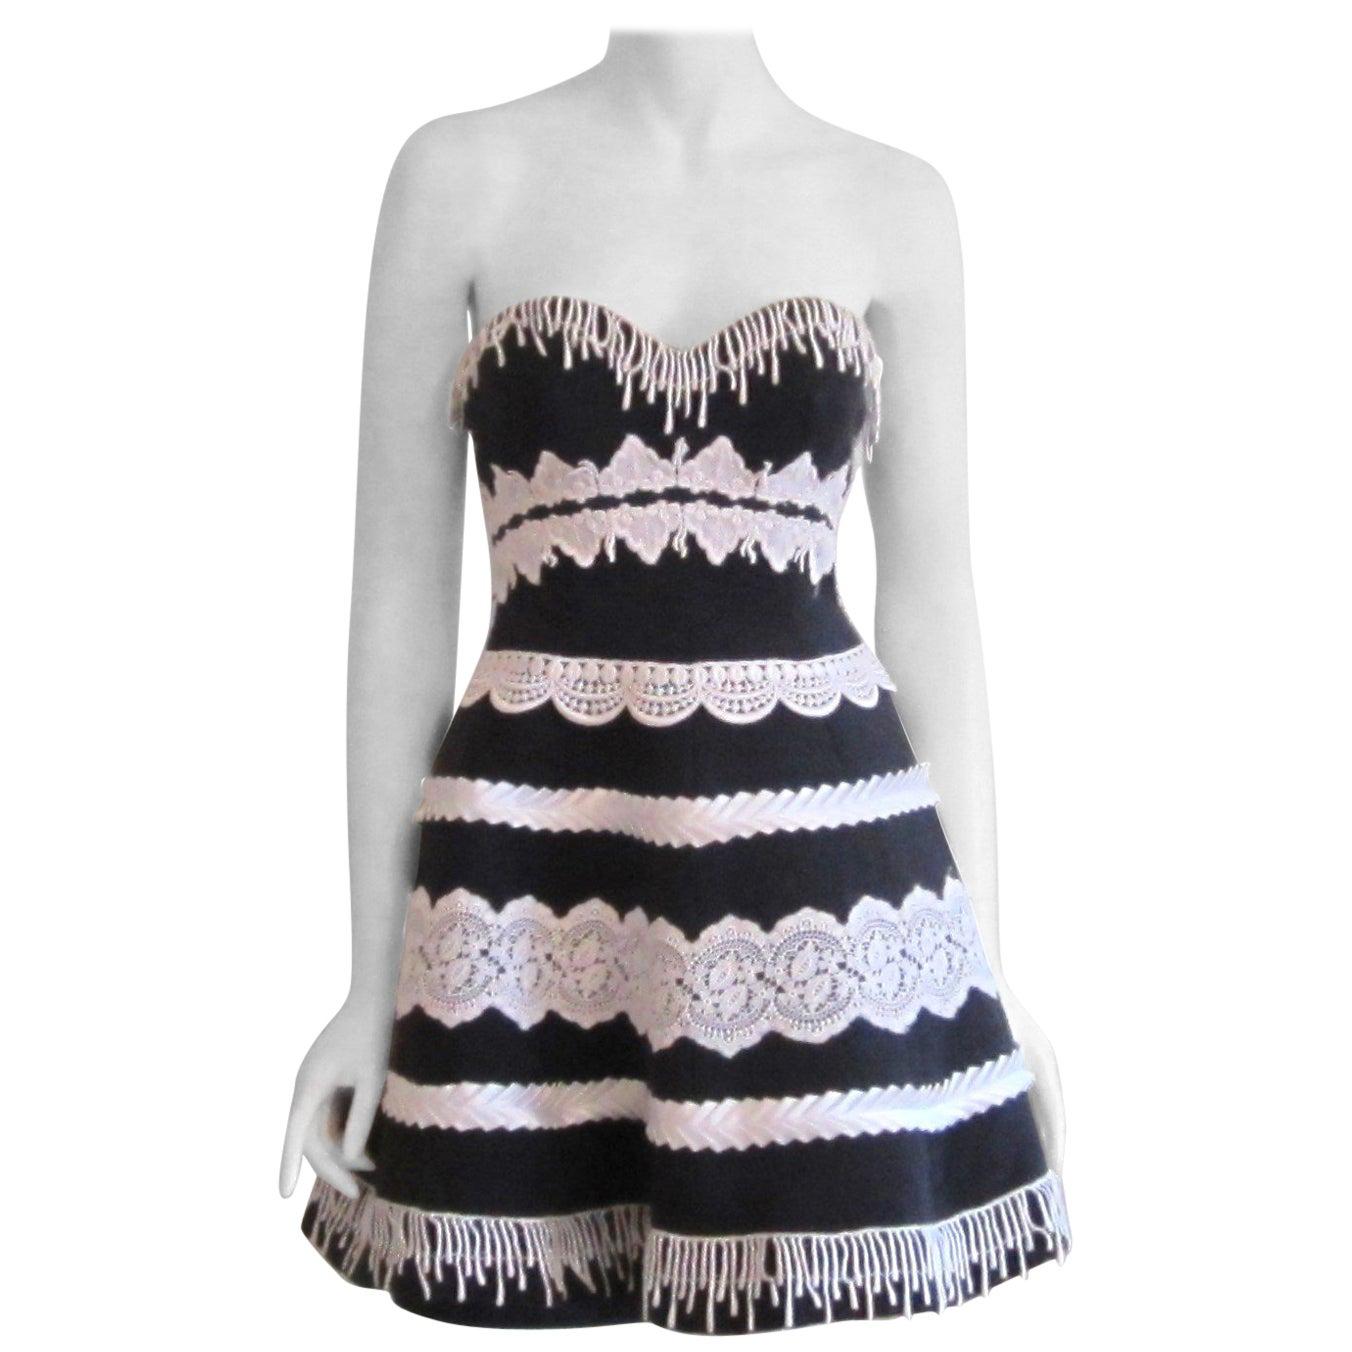  Victor Costa Black & White Strapless Cocktail Dress, 1980s  For Sale